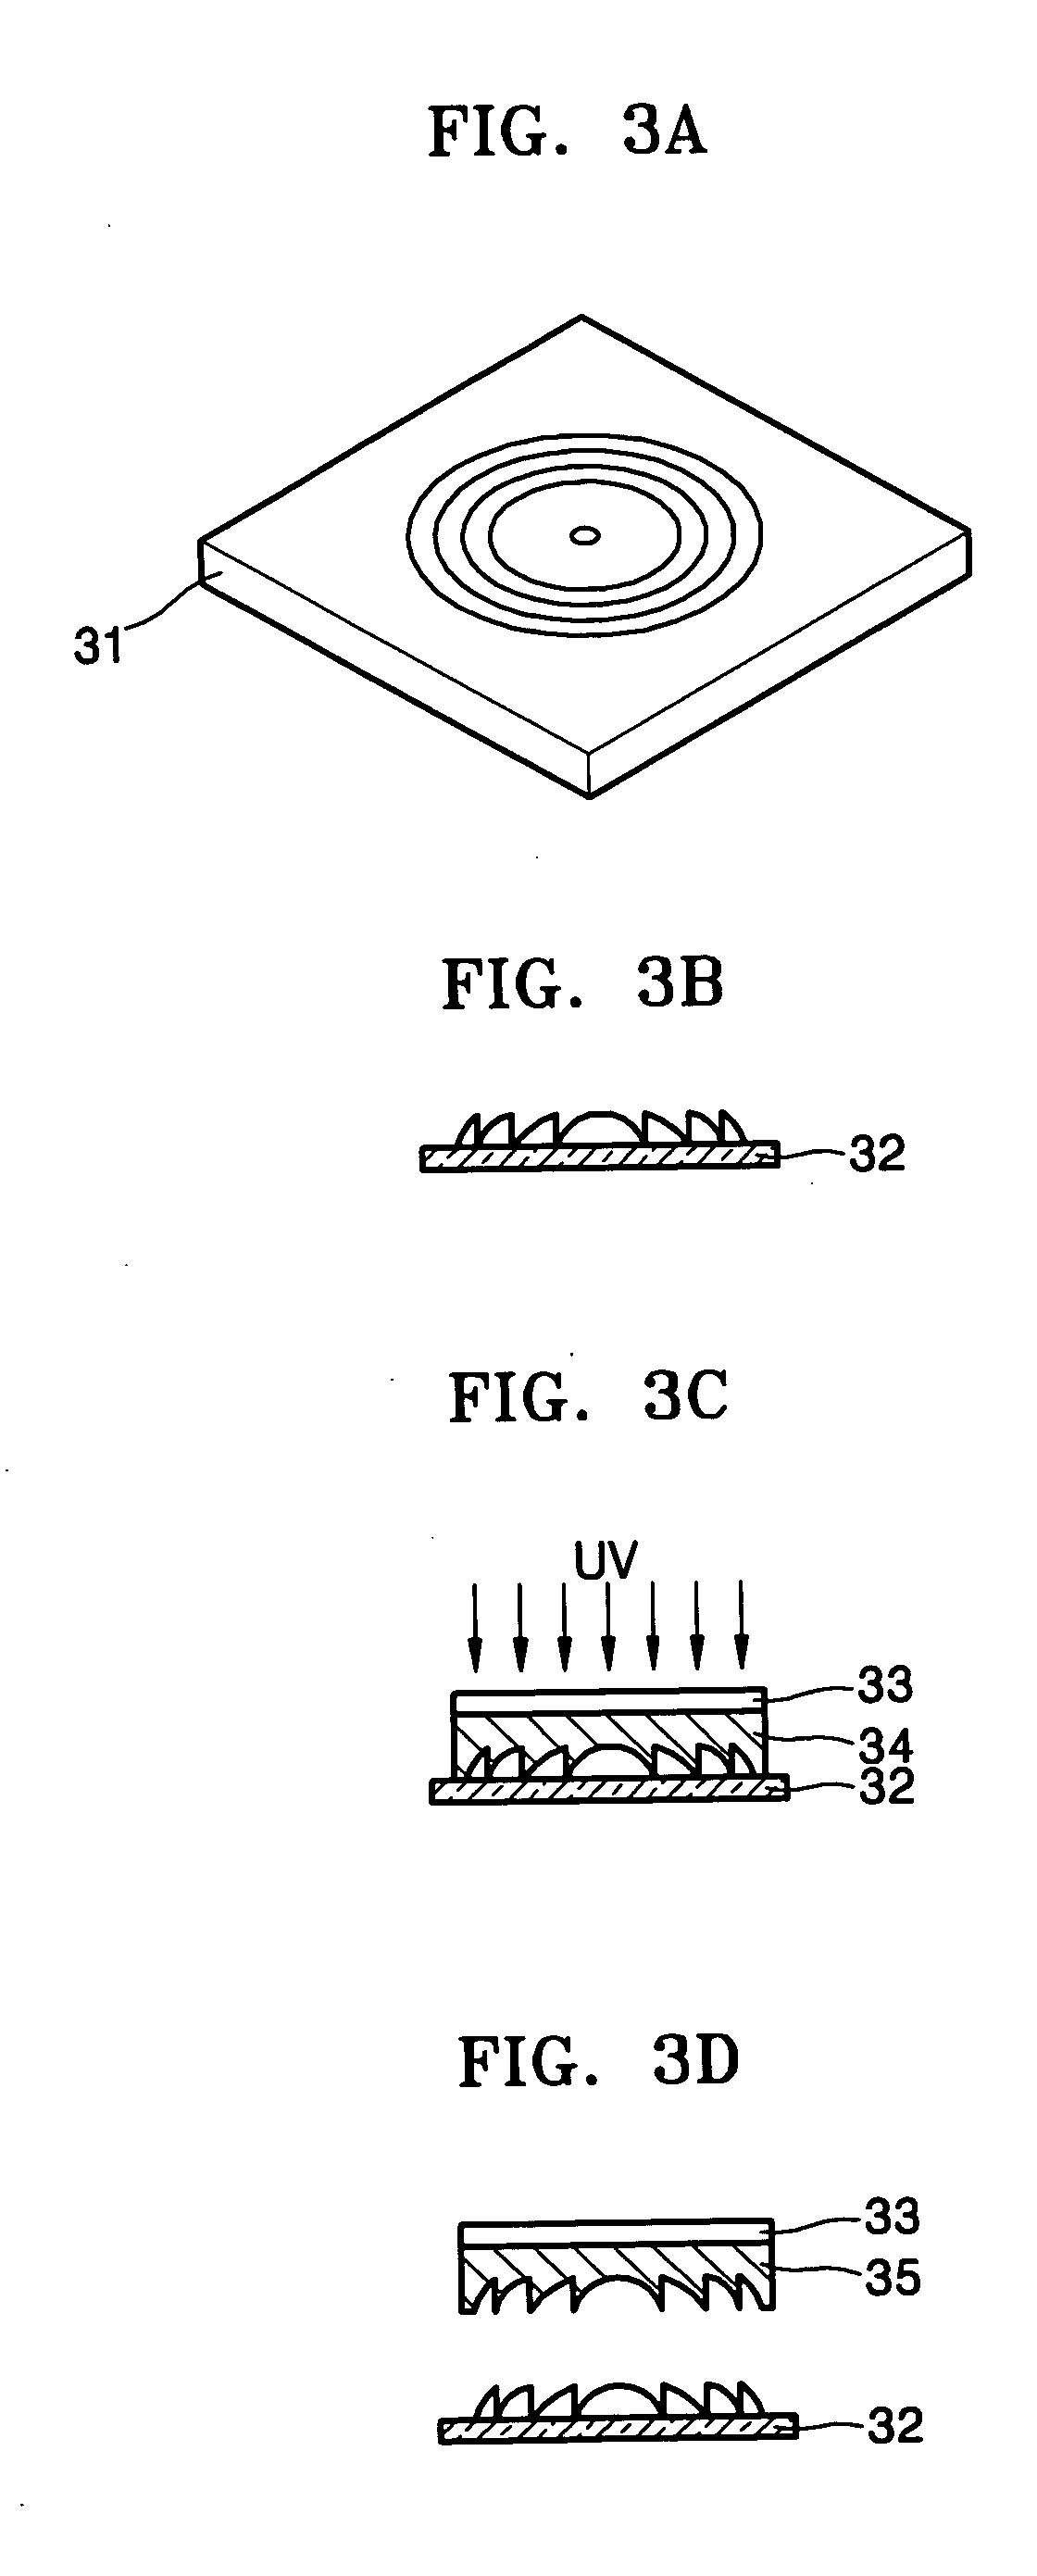 Method of fabricating diffractive lens array and UV dispenser used therein